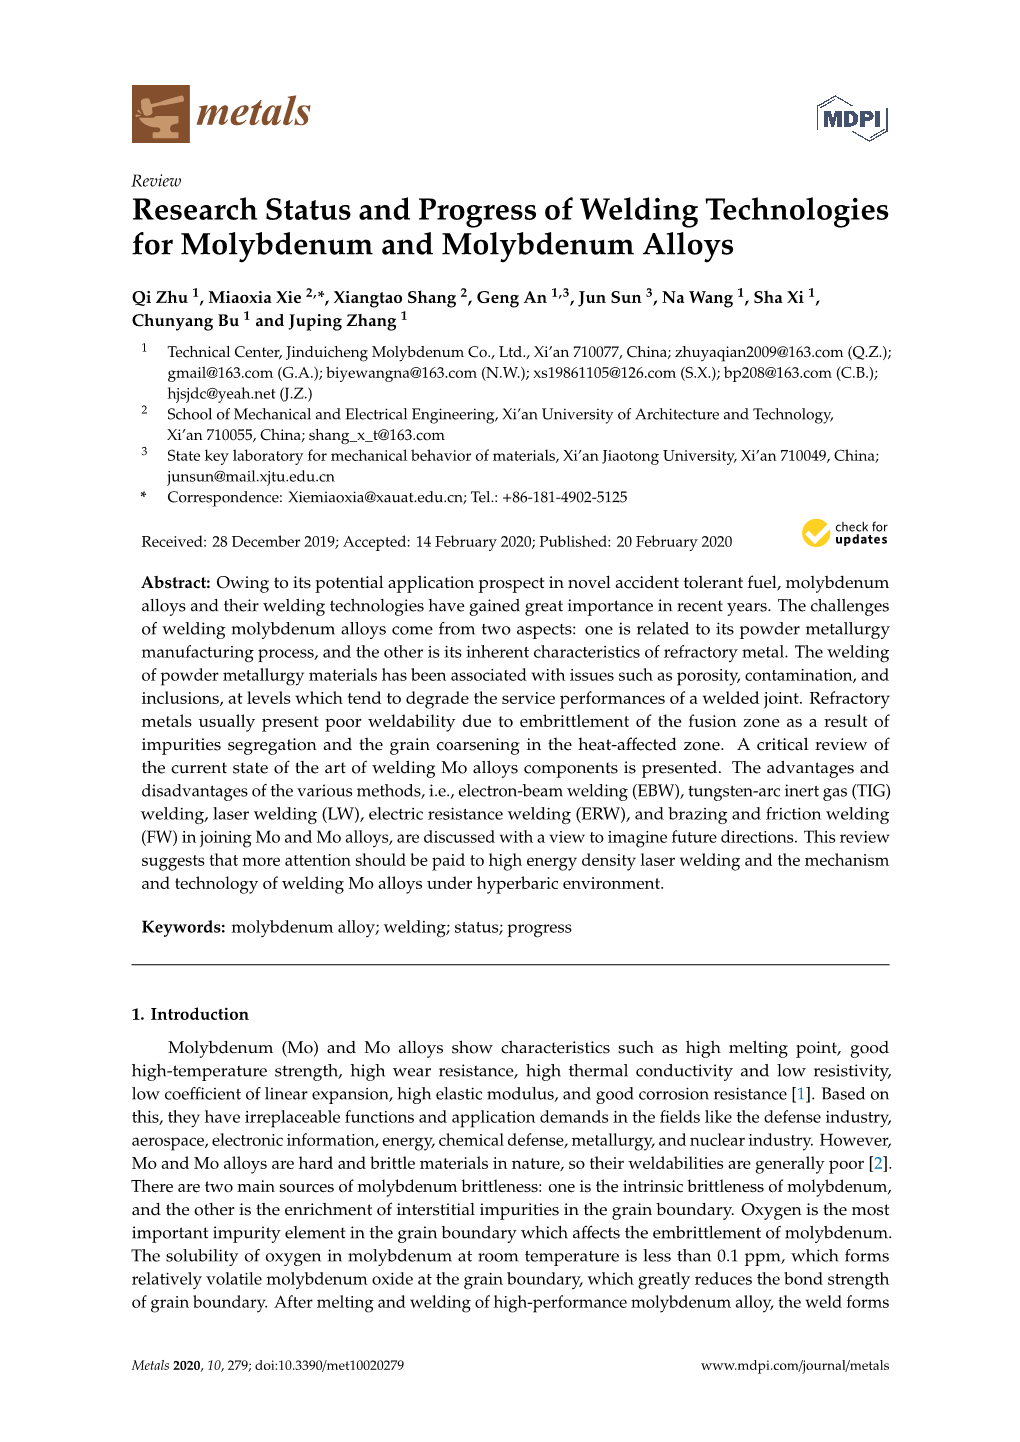 Research Status and Progress of Welding Technologies for Molybdenum and Molybdenum Alloys